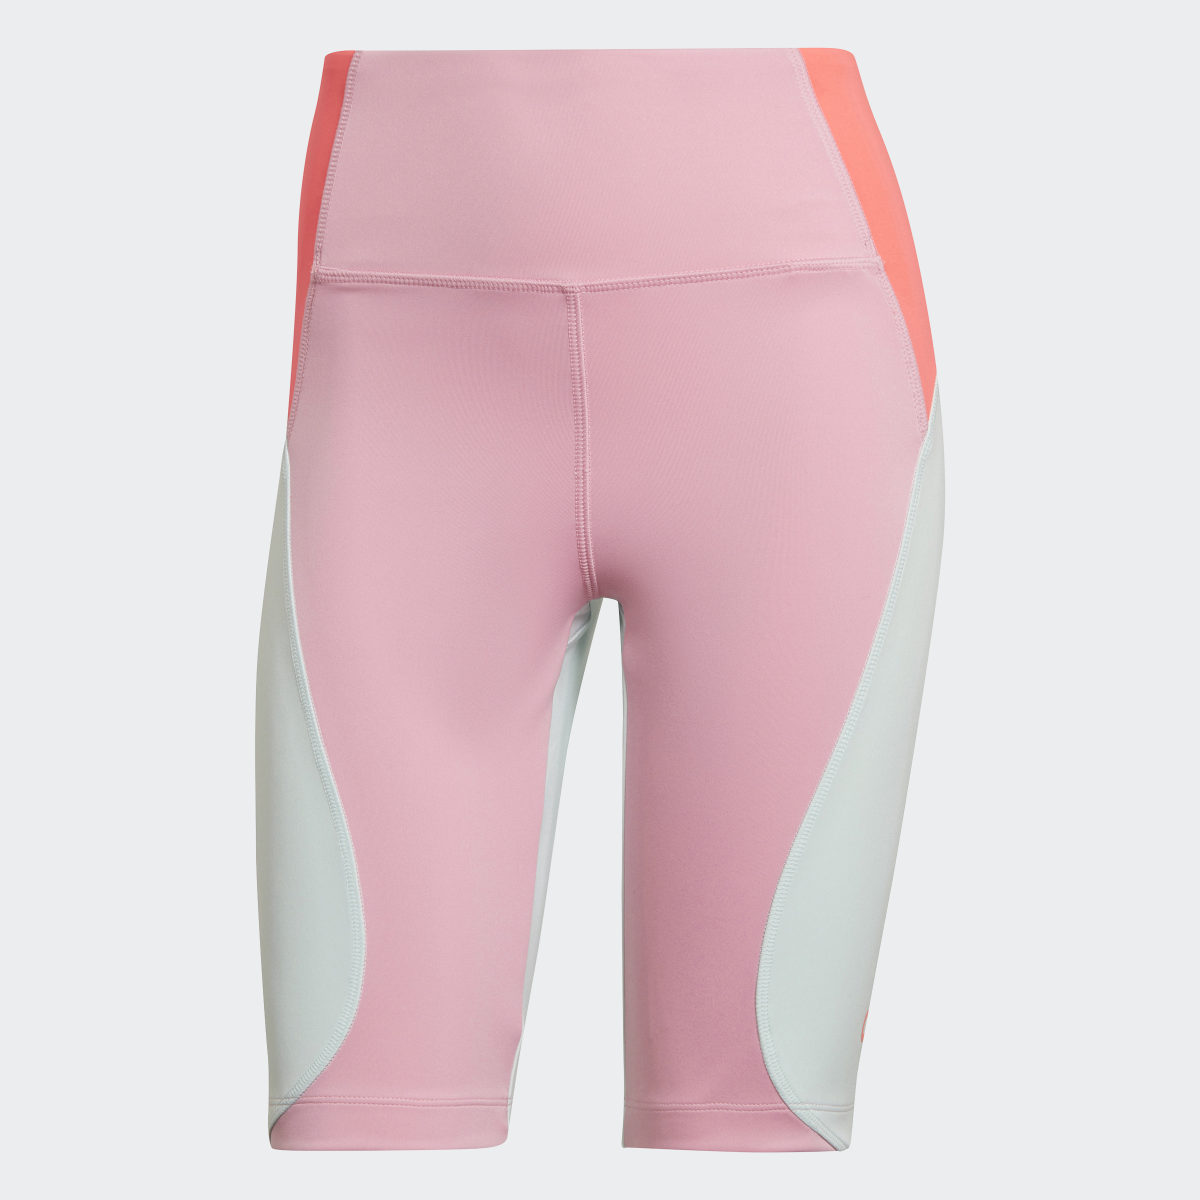 Adidas Designed to Move Colorblock Short Sport Tights. 4